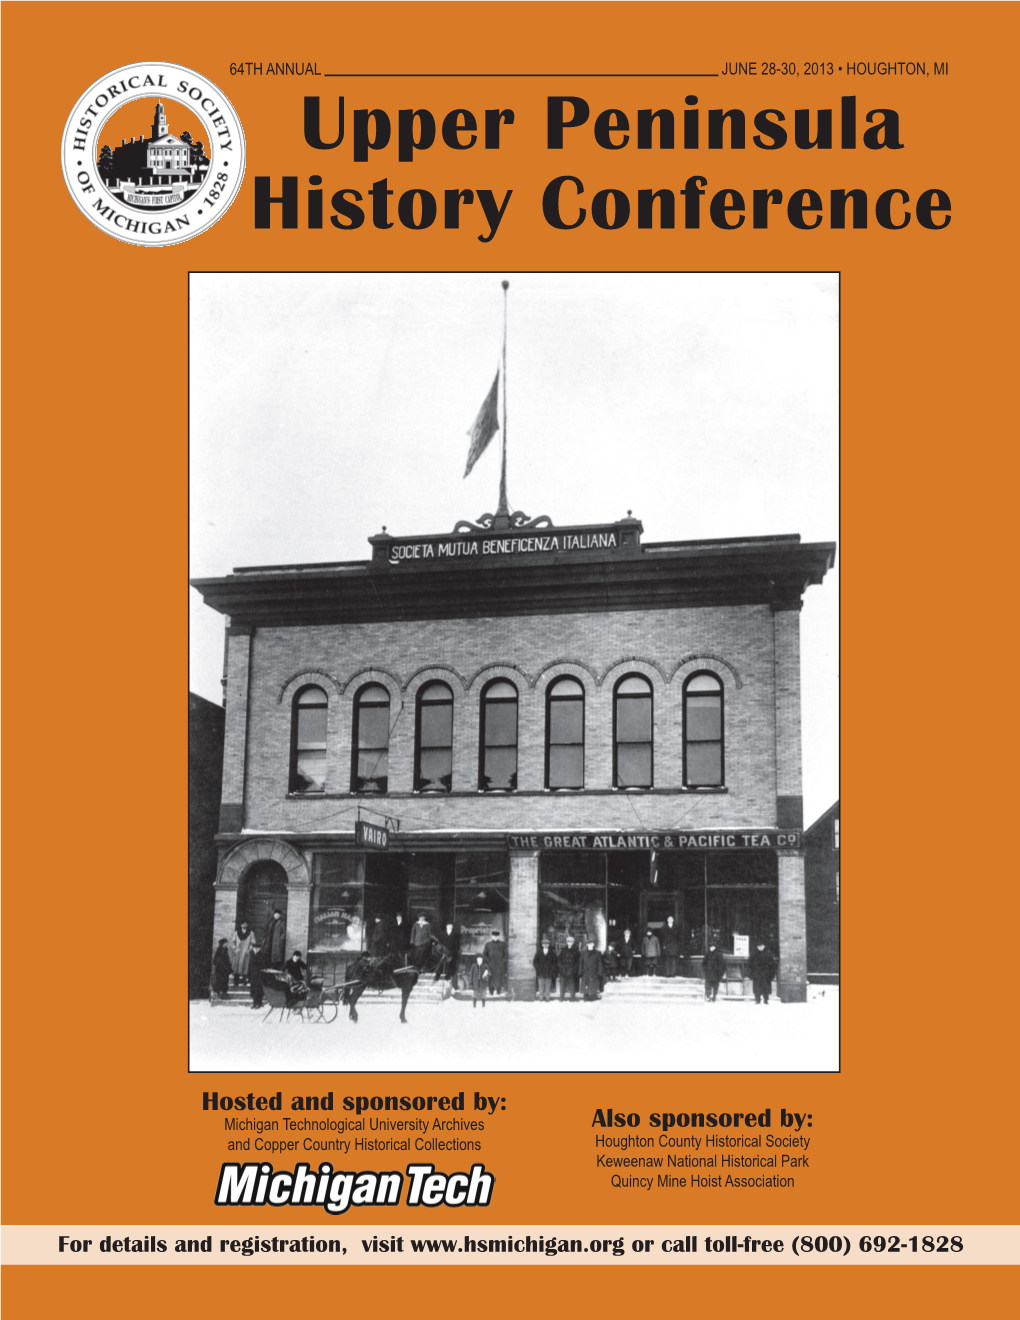 Upper Peninsula History Conference